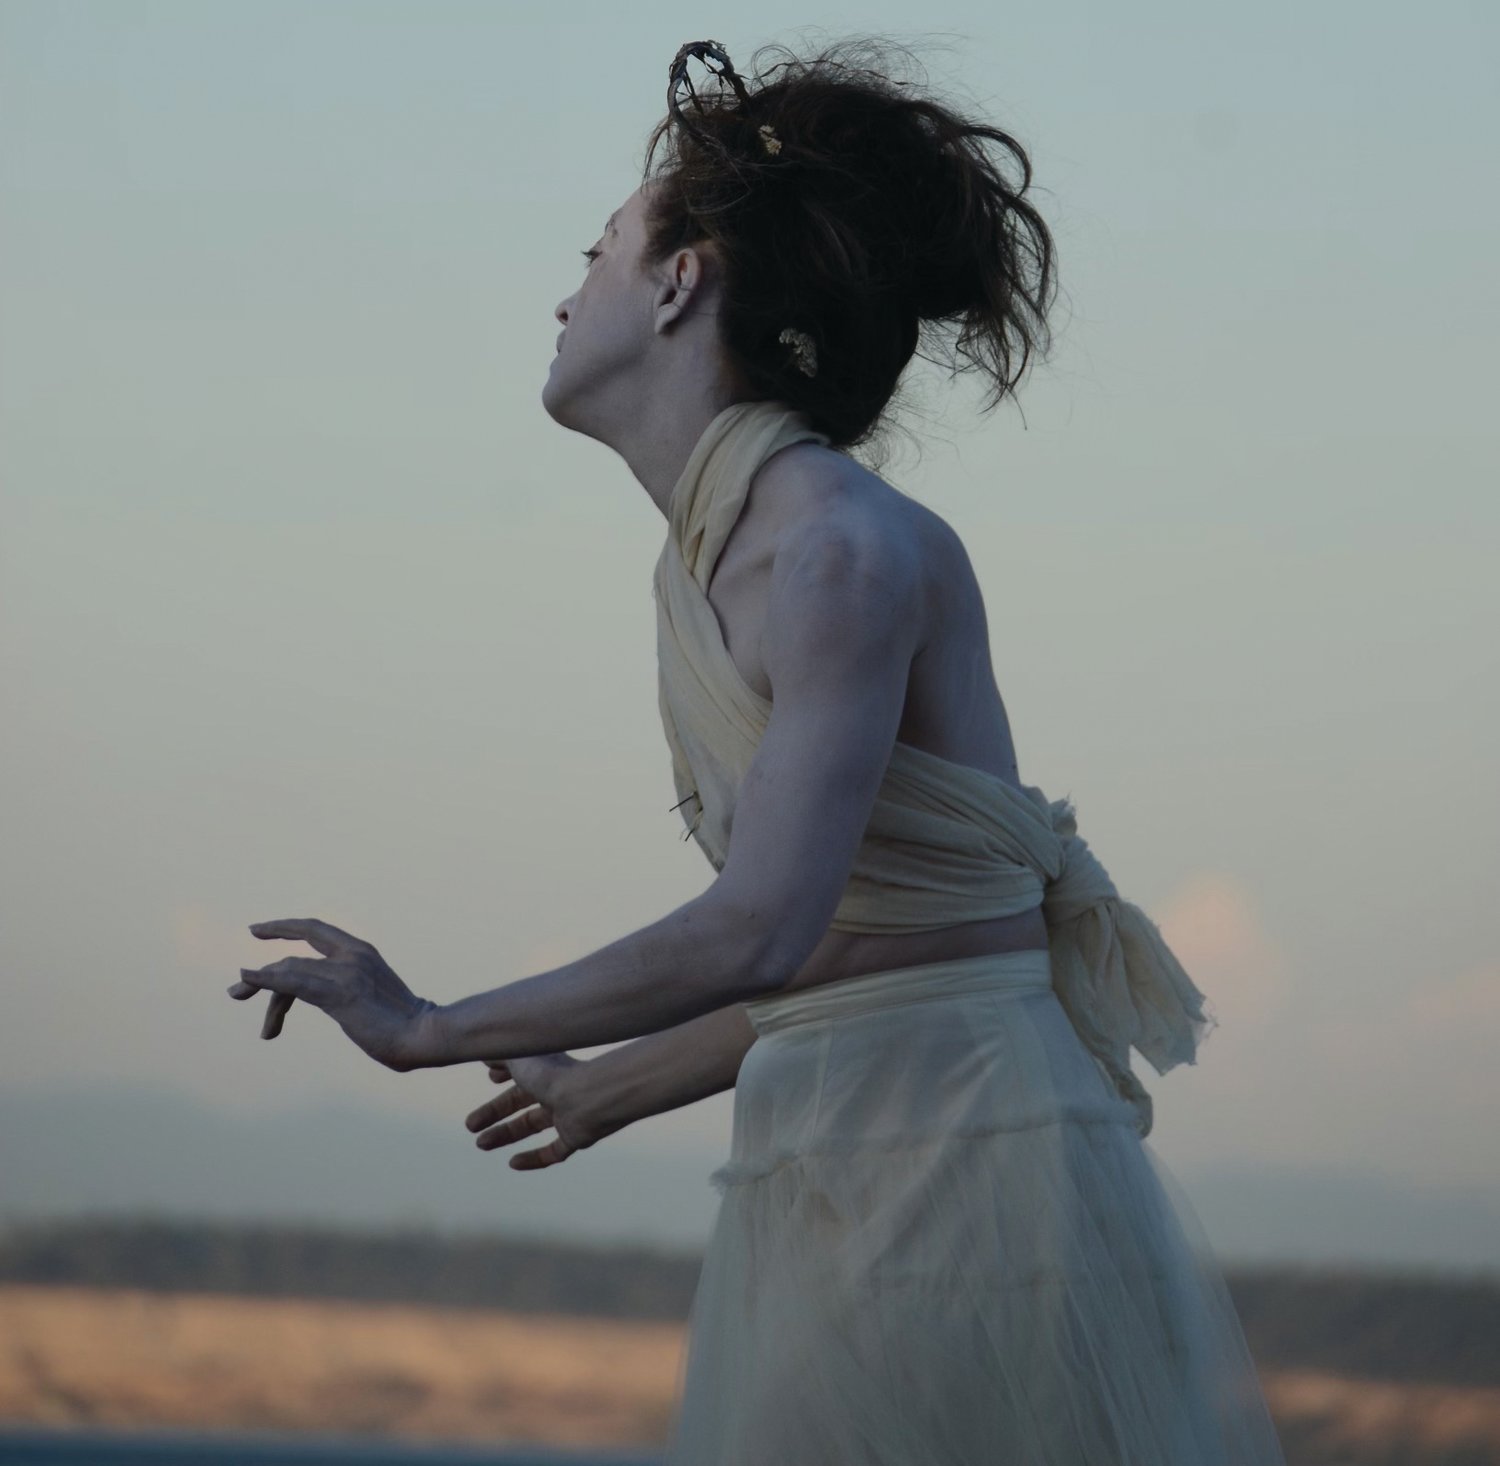 Butoh features a diverse range of movements, techniques, and motivations.